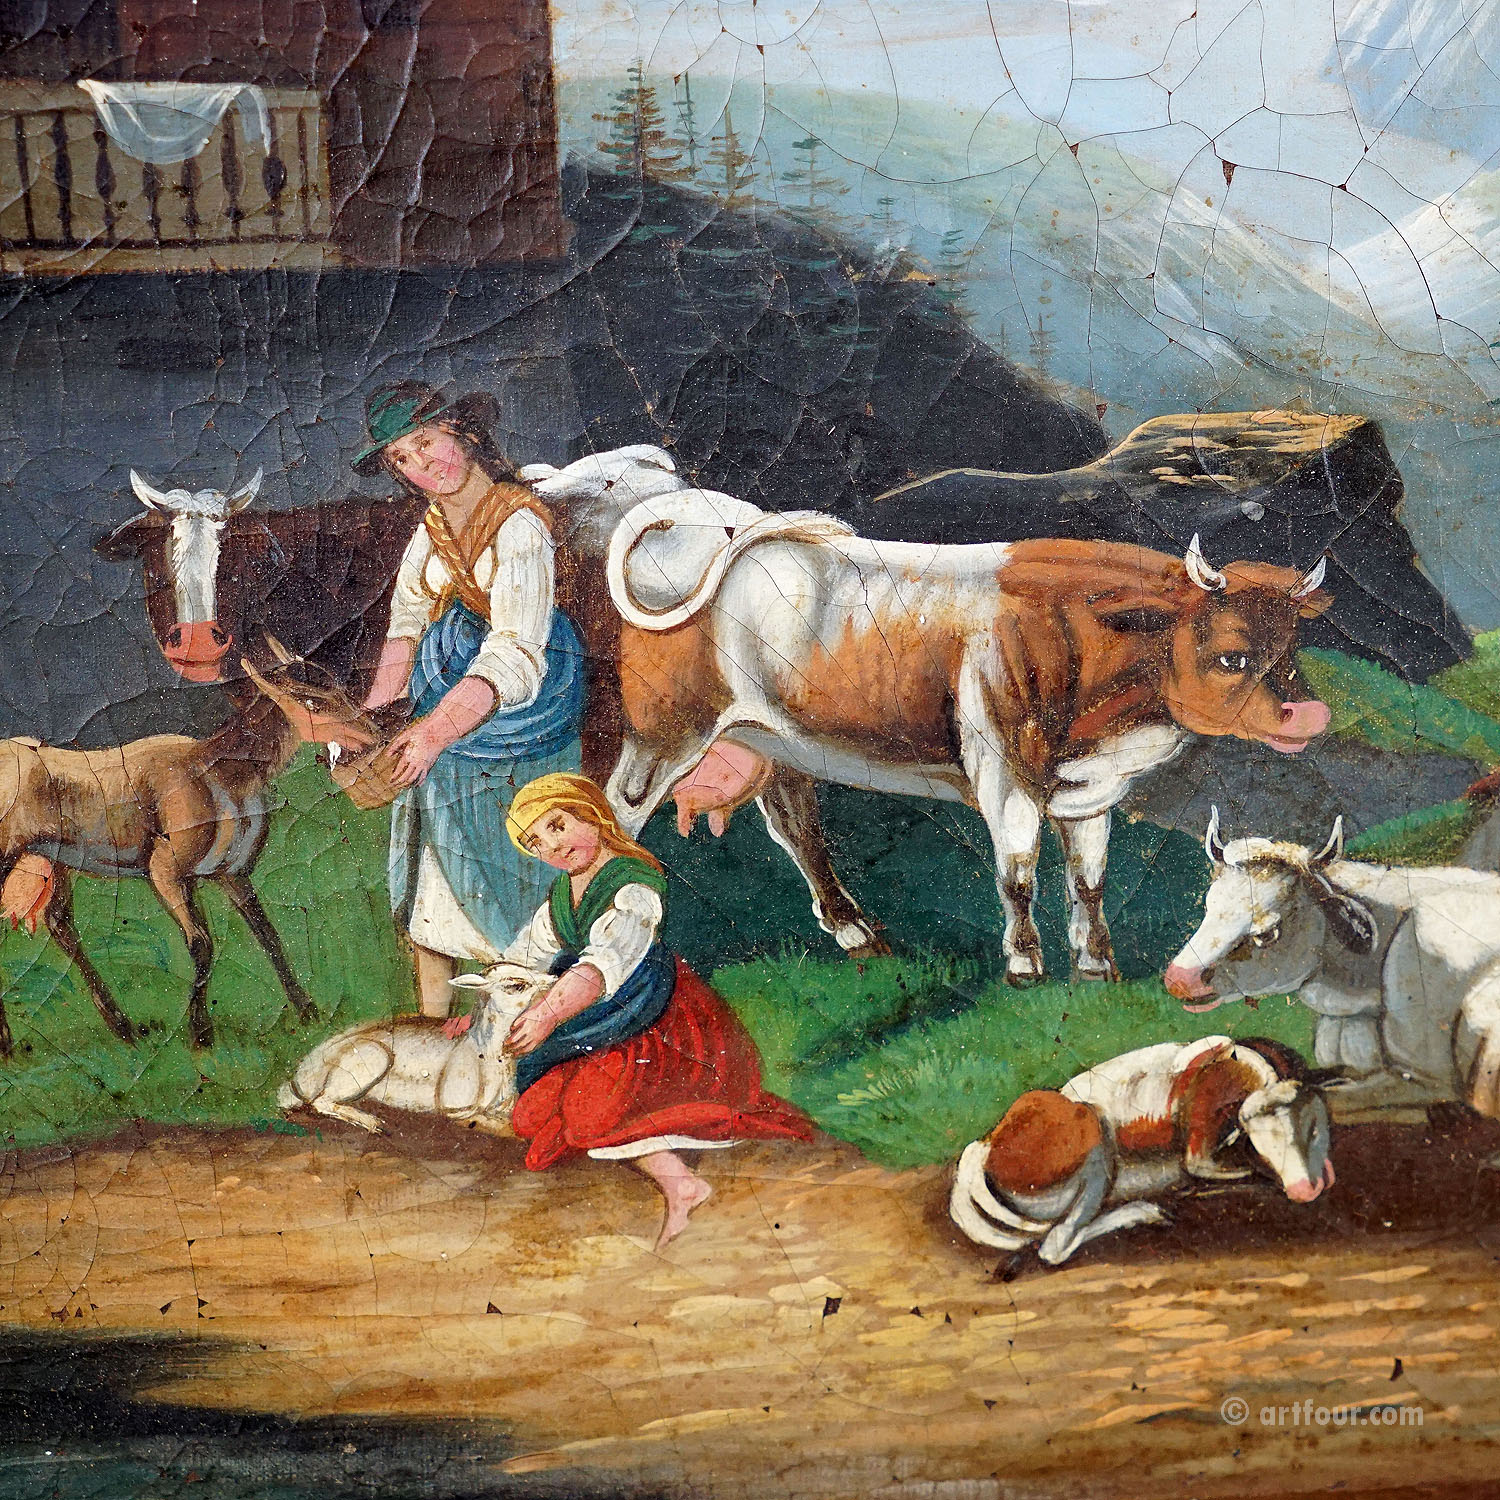 Oil Painting Folksy Scenery with Cattles, Goats and Farmer's Wifes, ca. 1900s